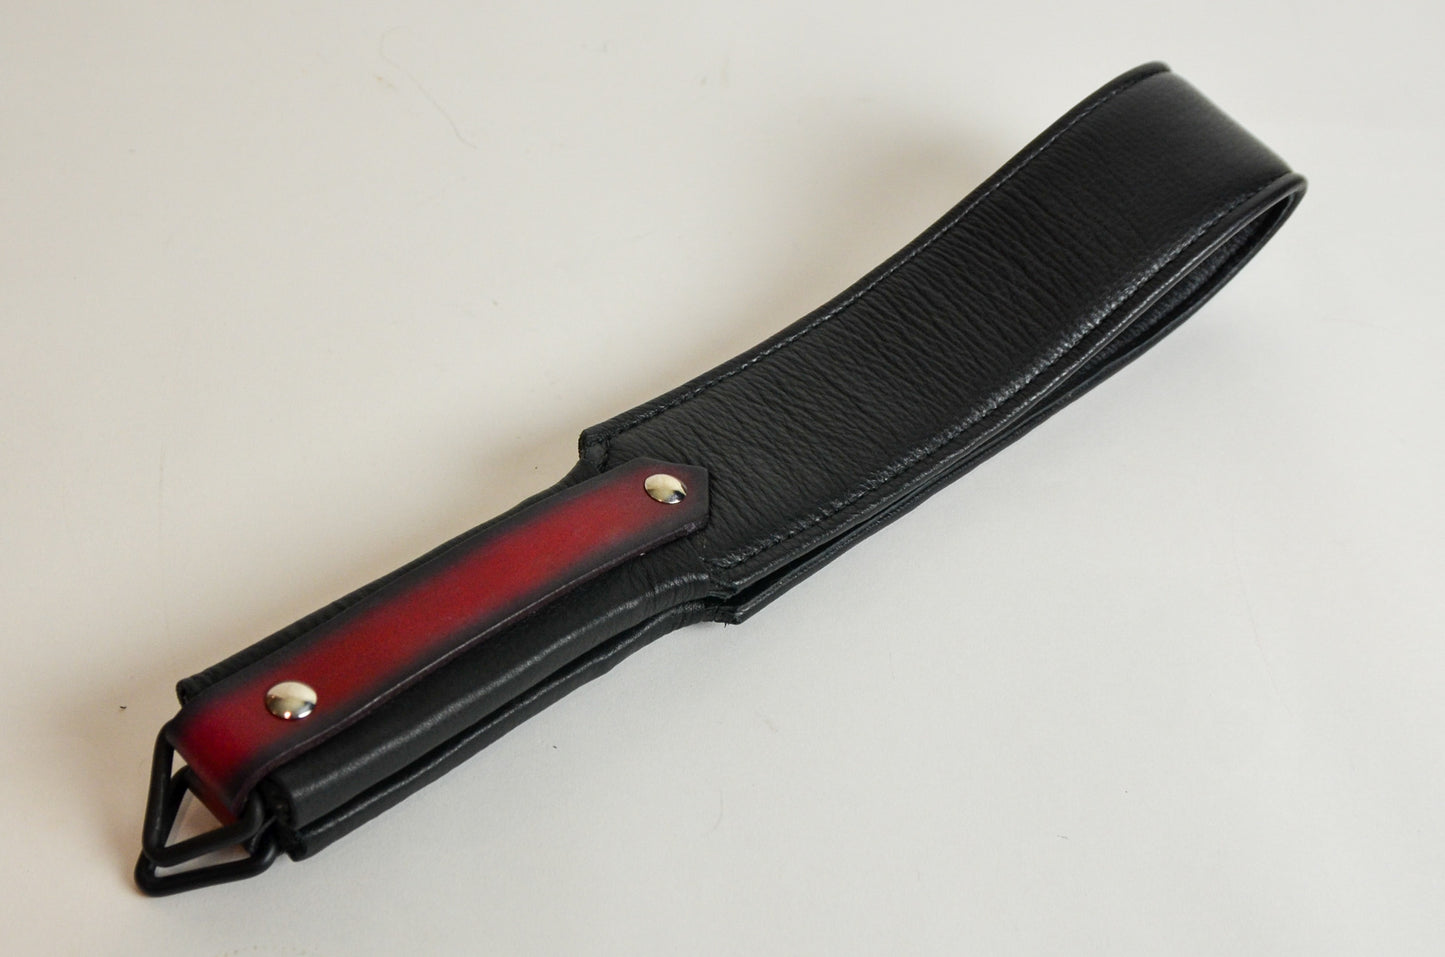 Split Thumper - Black with Red Two-Tone Handle Strap